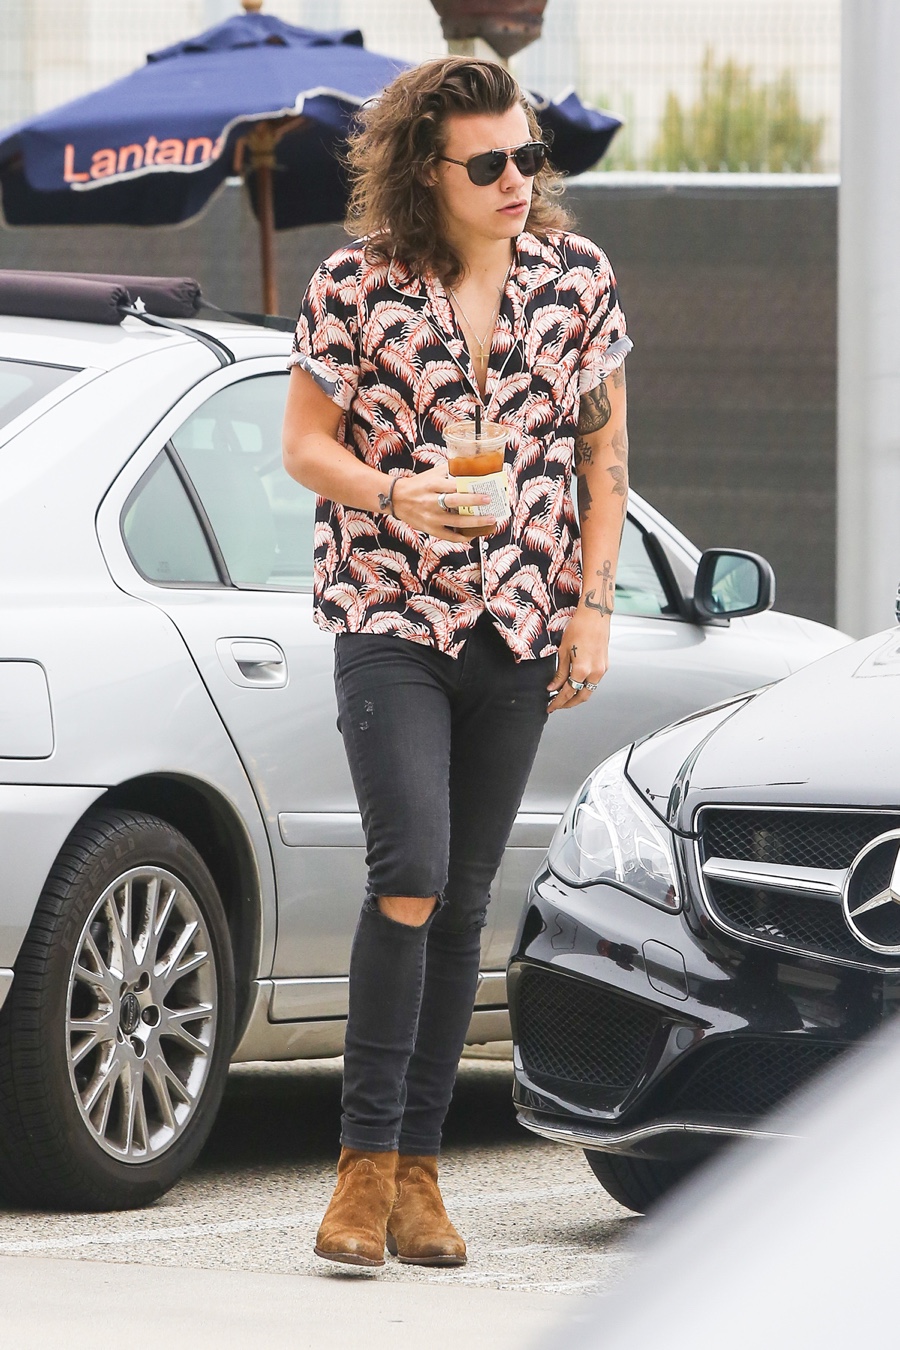 Get The Look: Harry Styles in Marc Jacobs Palm Print Shirt